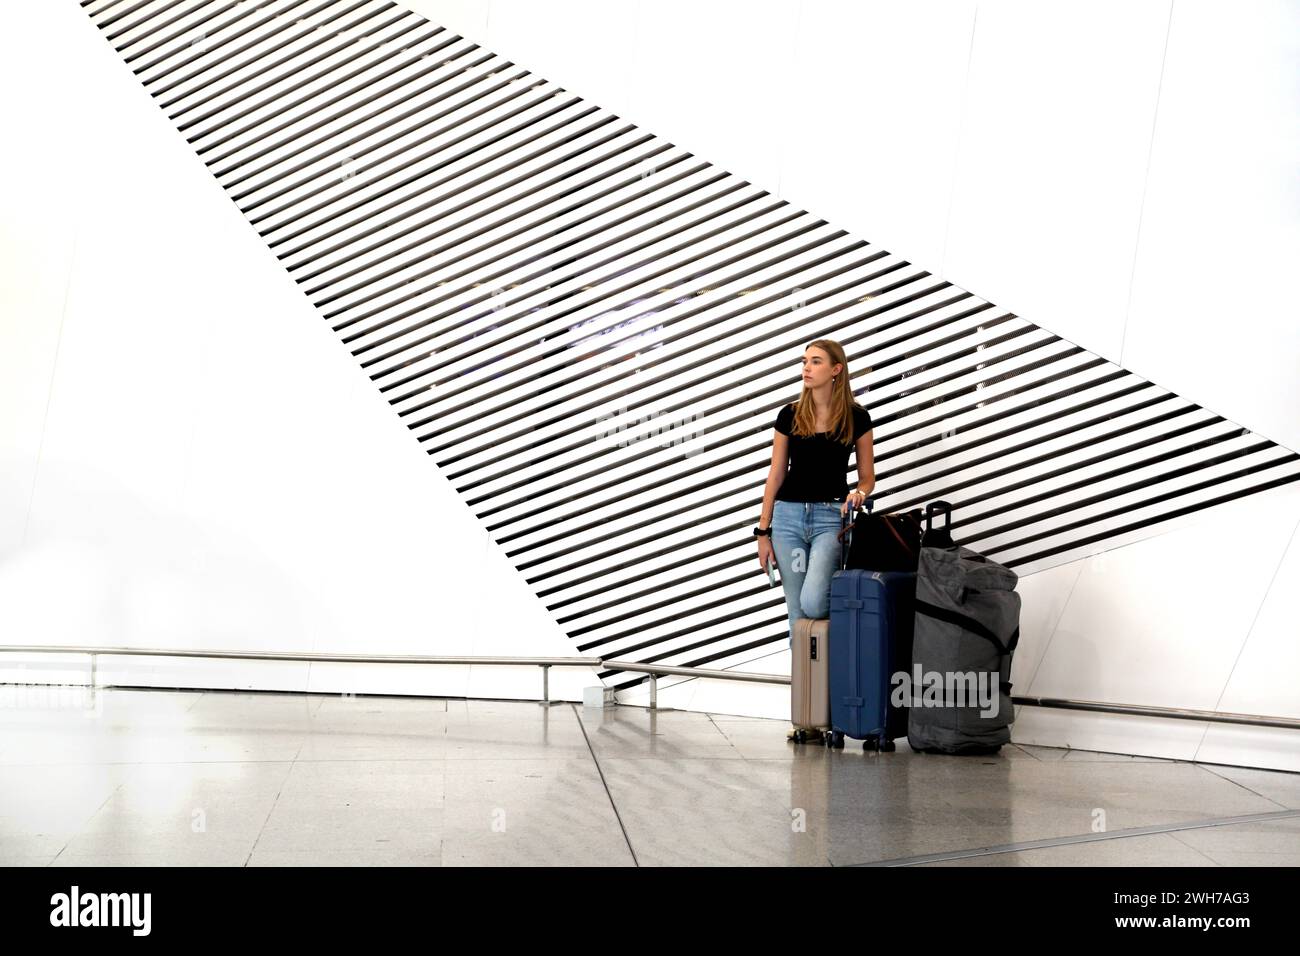 Athens Greece Athens International Airport (AIA) Eleftherios Venizelos Woman With Suitcases Standing next to Artistic Vents in the Wall Stock Photo